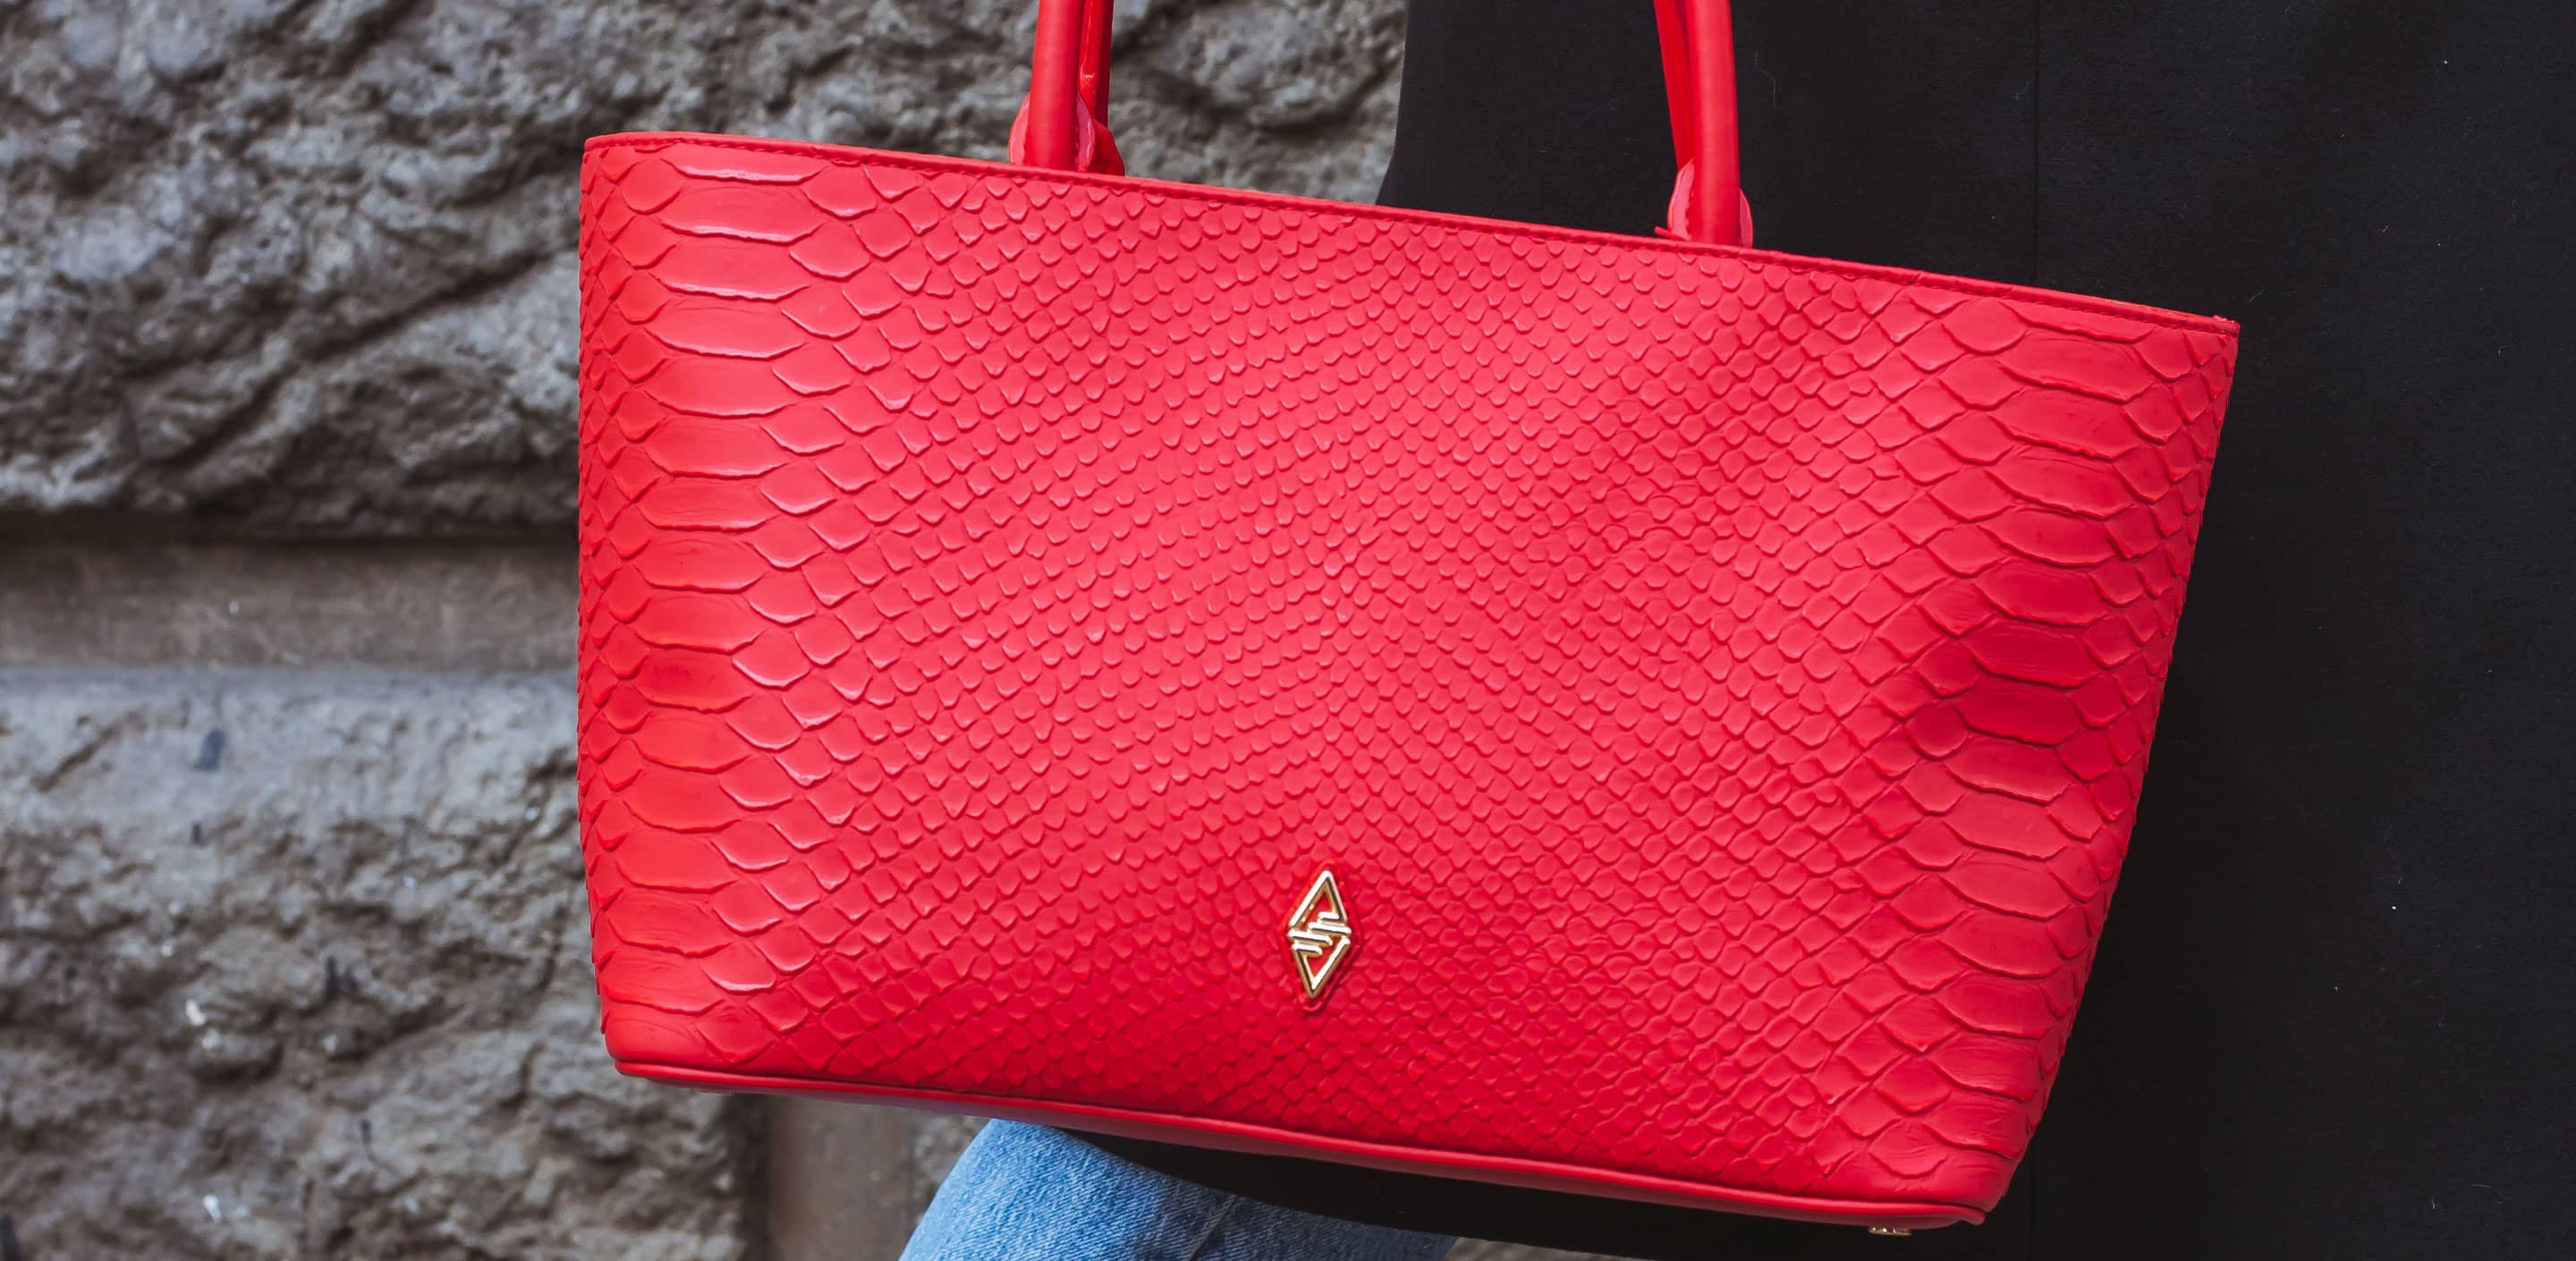 Exotic Leather Handbags Give You Luxury for a Lifetime!